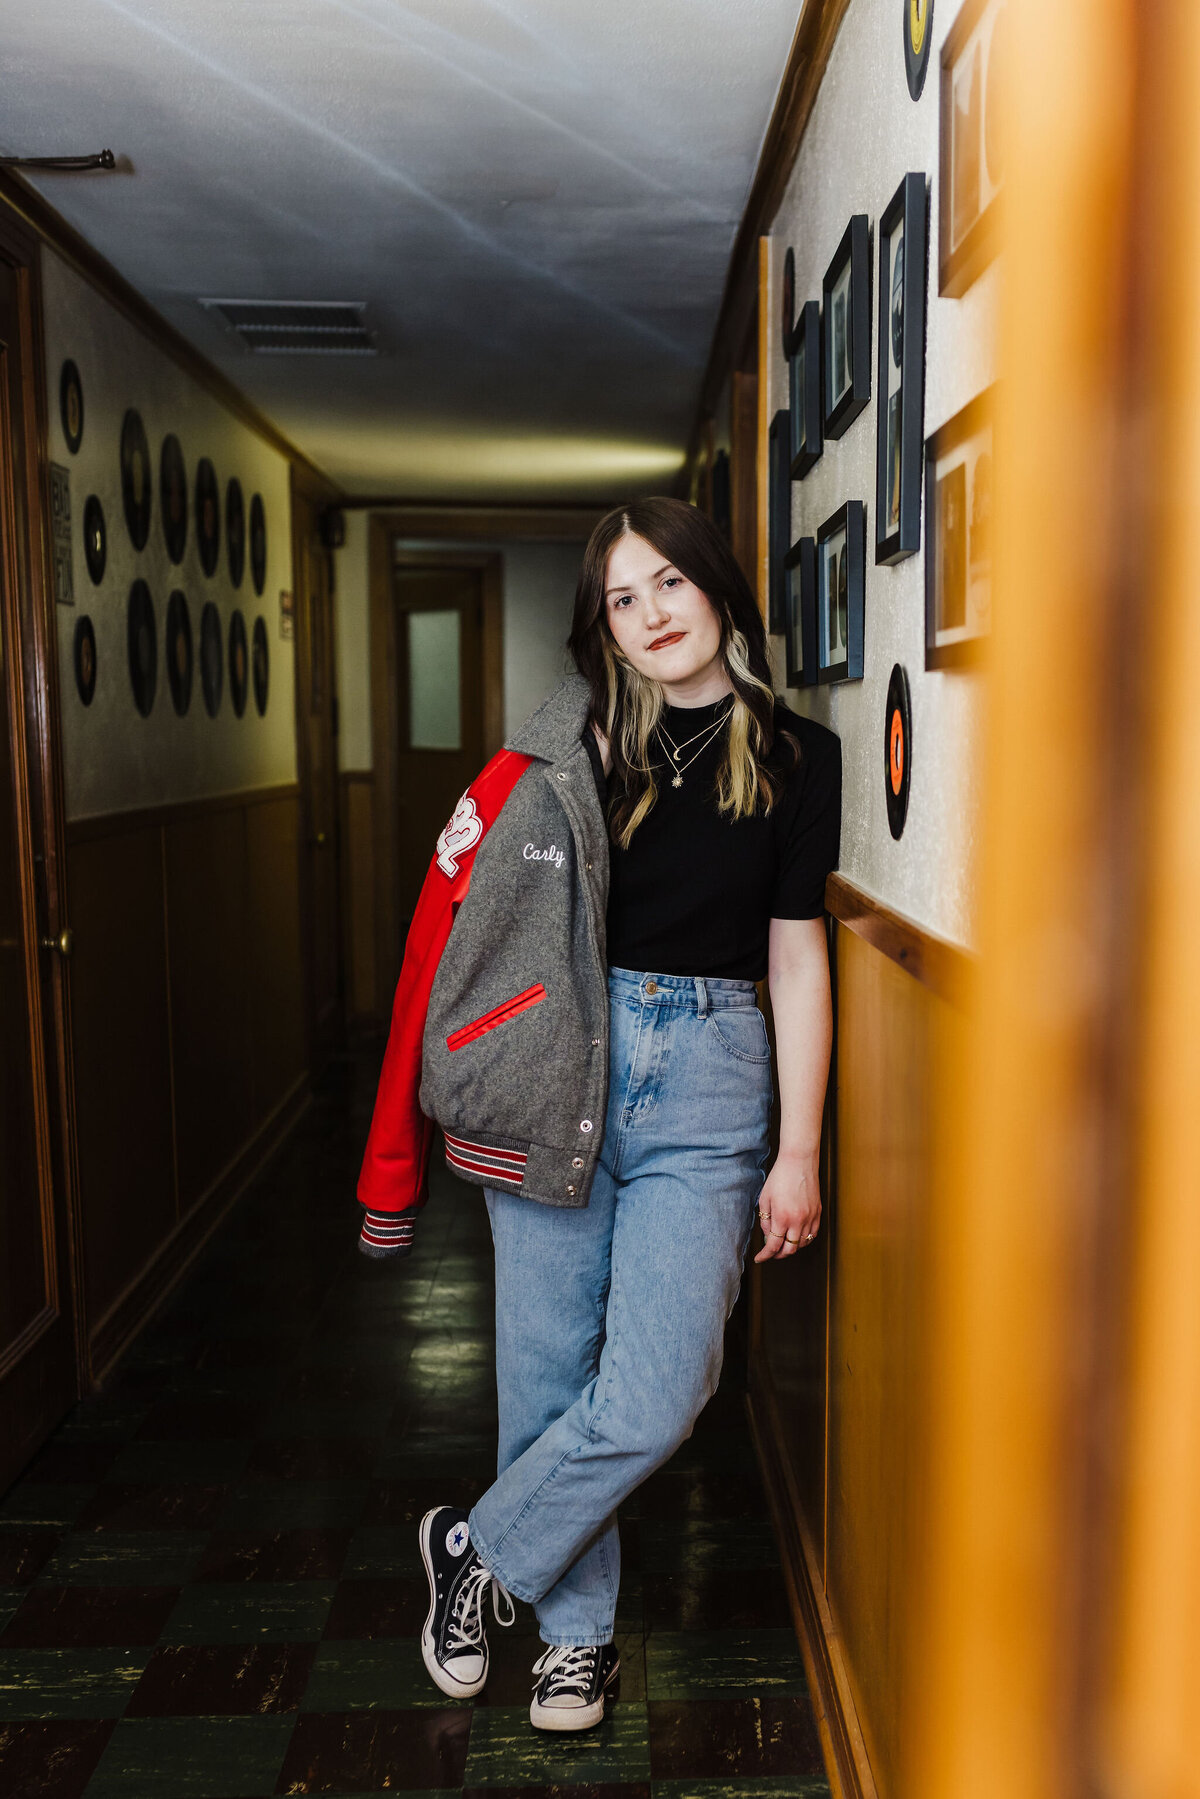 Senior portrait of girl with letterman jacket leaning on hallway wall in Gladewater Texas recording studio